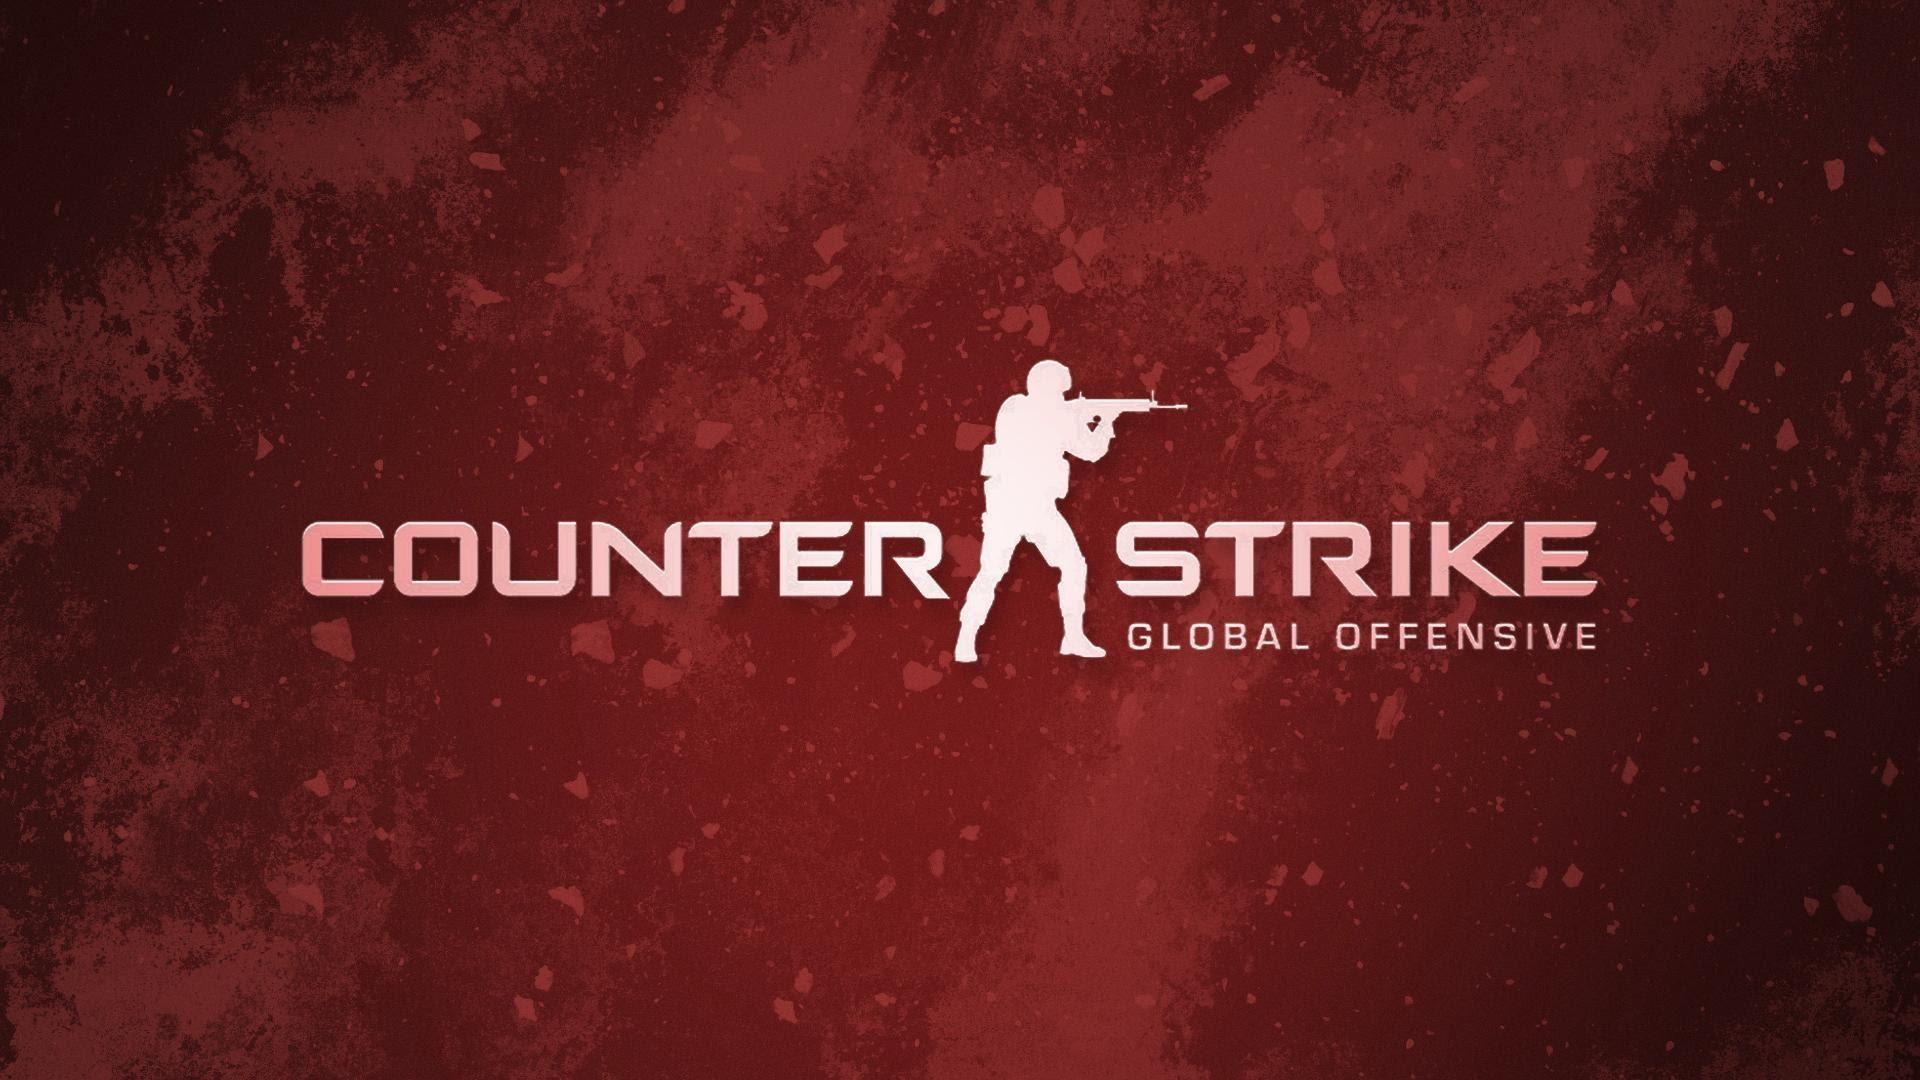 Global HD Logo - 123 High Resolution CS:GO Wallpapers to Freshen Your Background ...